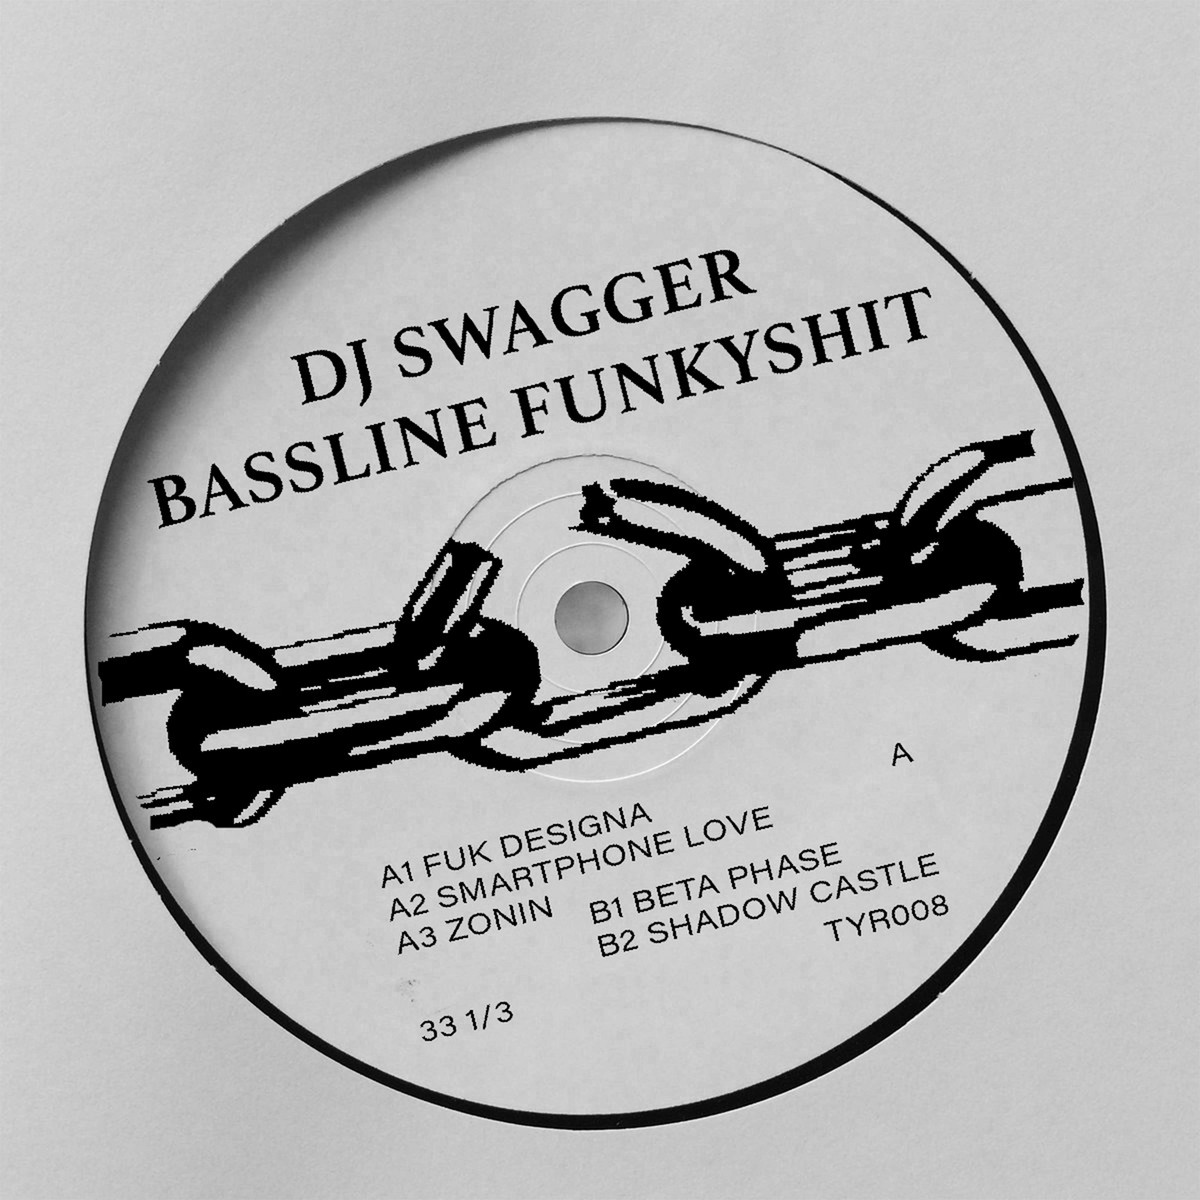 DJ Swagger - Bassline Funkyshit EP - TYR008 - THIRTY YEAR RECORDS